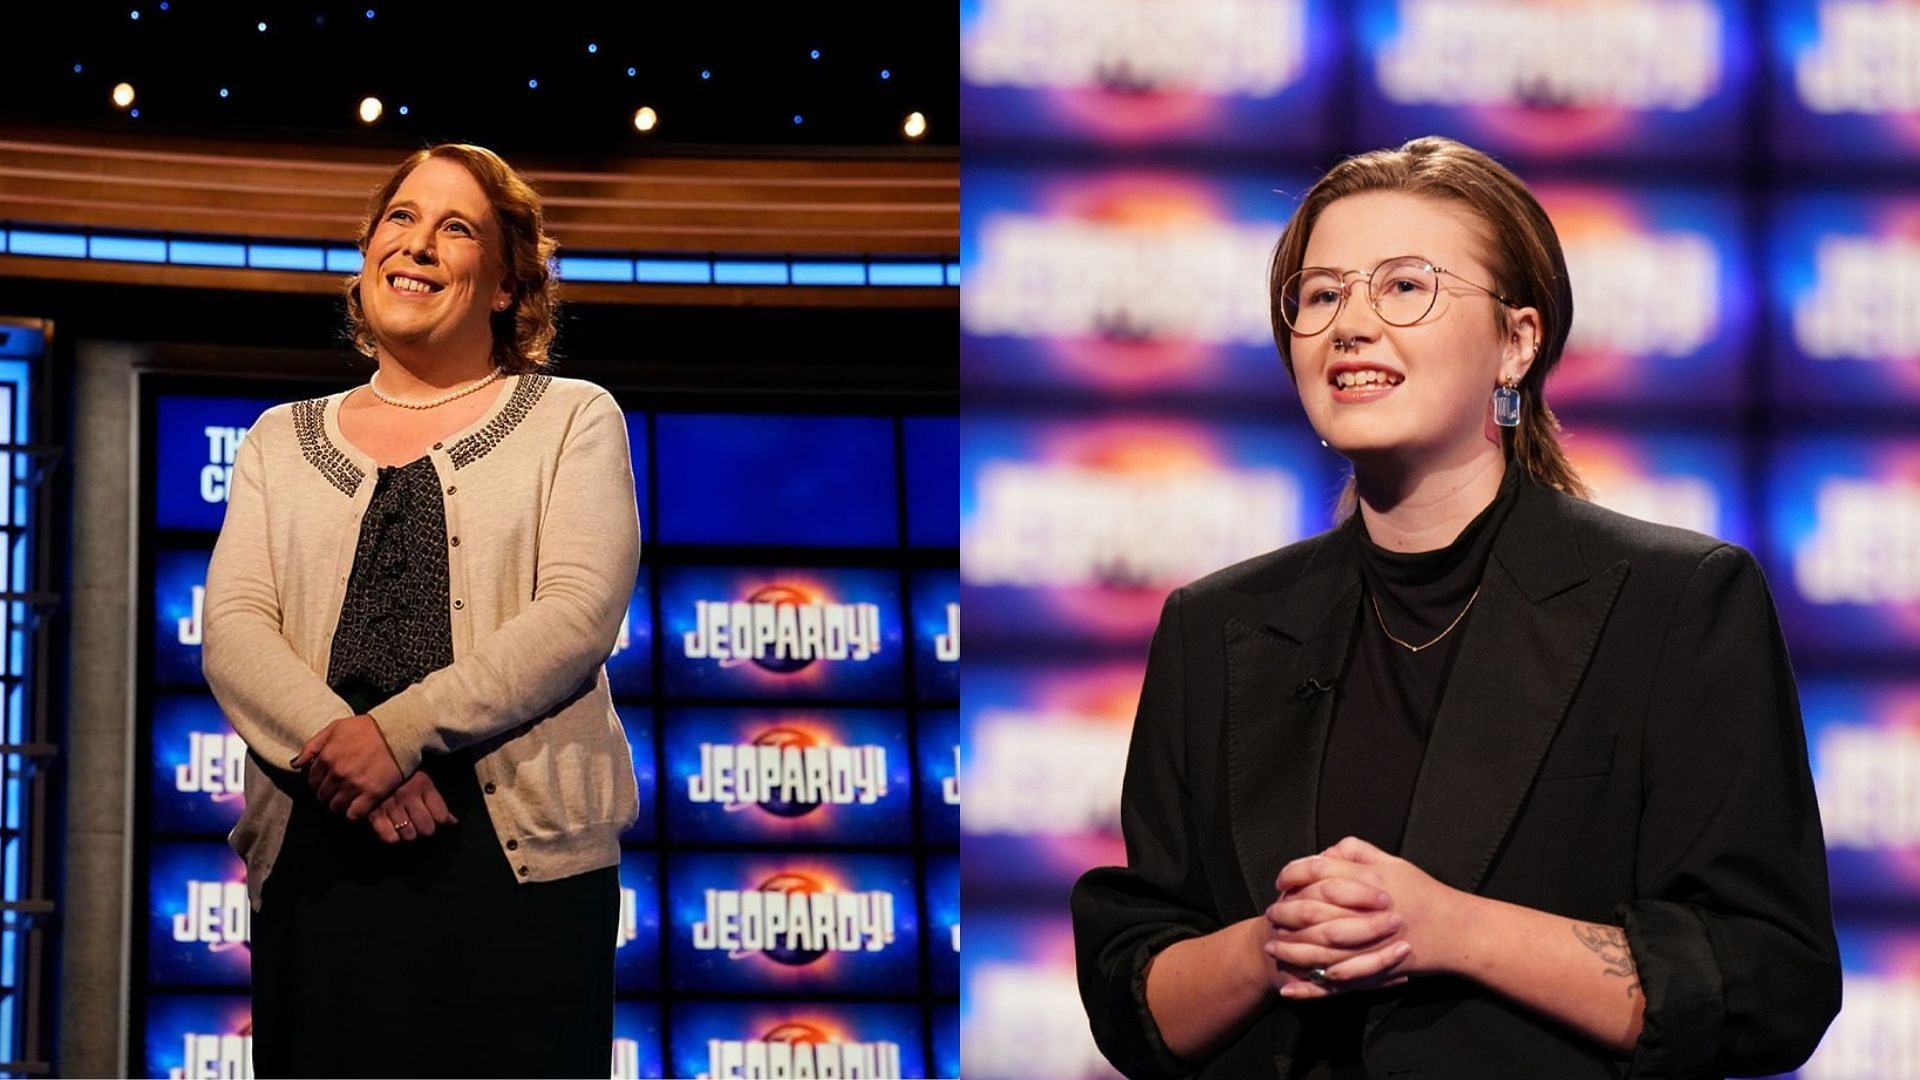 Amy Schneider and Mattea Roach will participate in Jeopardy! Tournament of Champions 2022